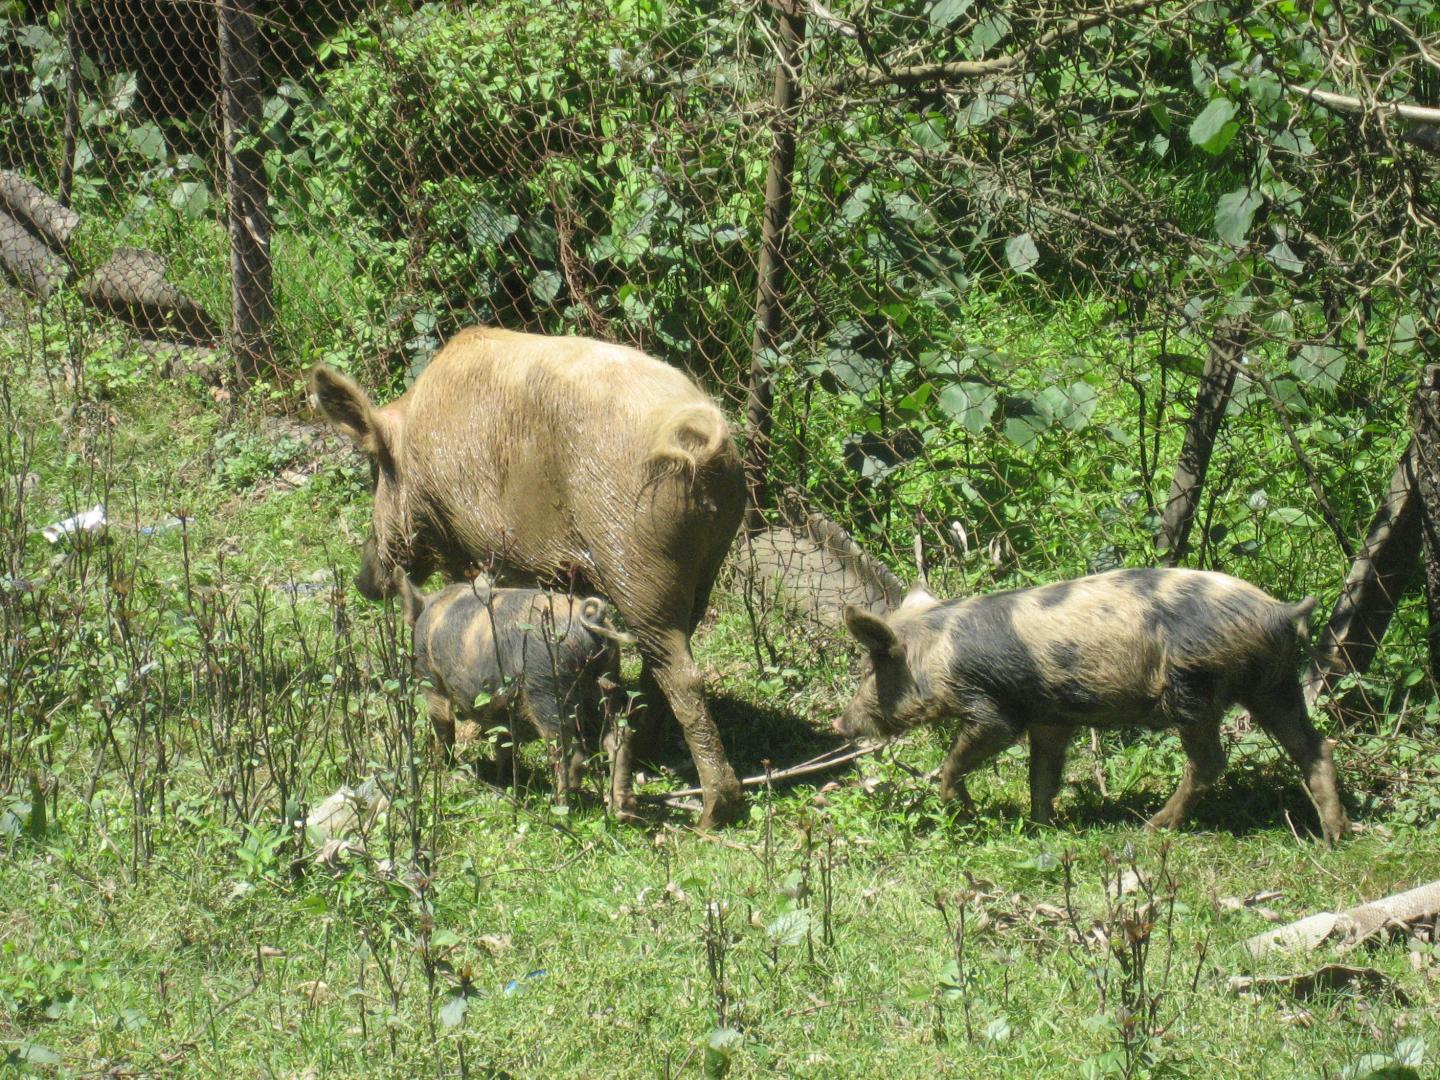 Backyard Pig Trade Provides Insight to Controlling African Swine Fever